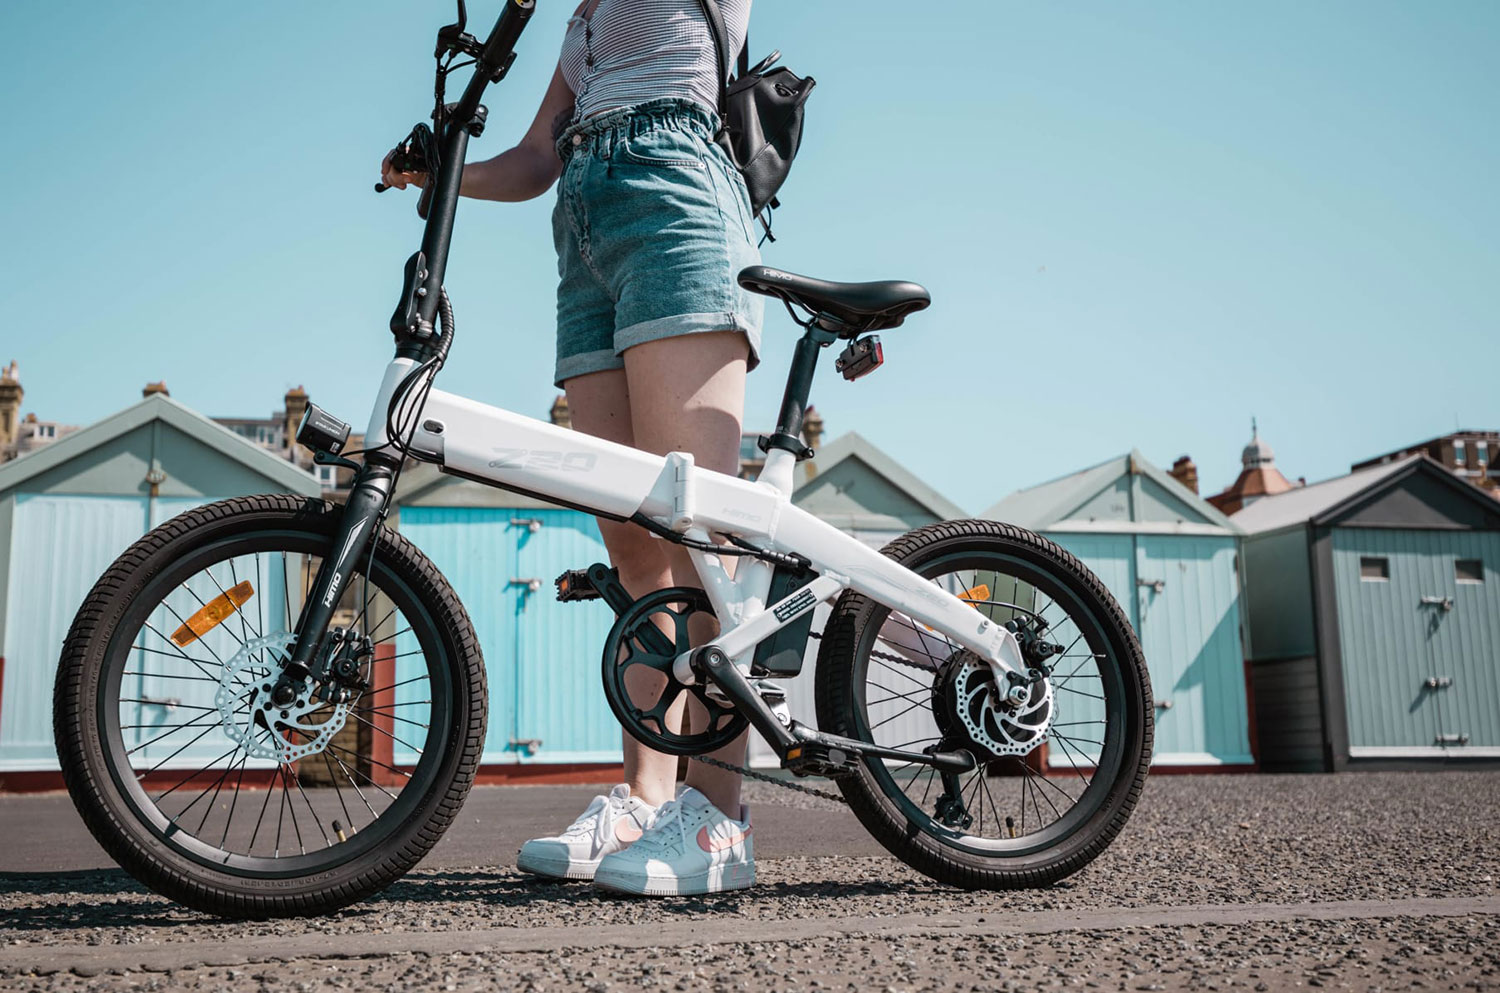 In recent times, several new electric bicycles arrived for people who want to move around the city or the mountain quickly and easily. Well, now it is